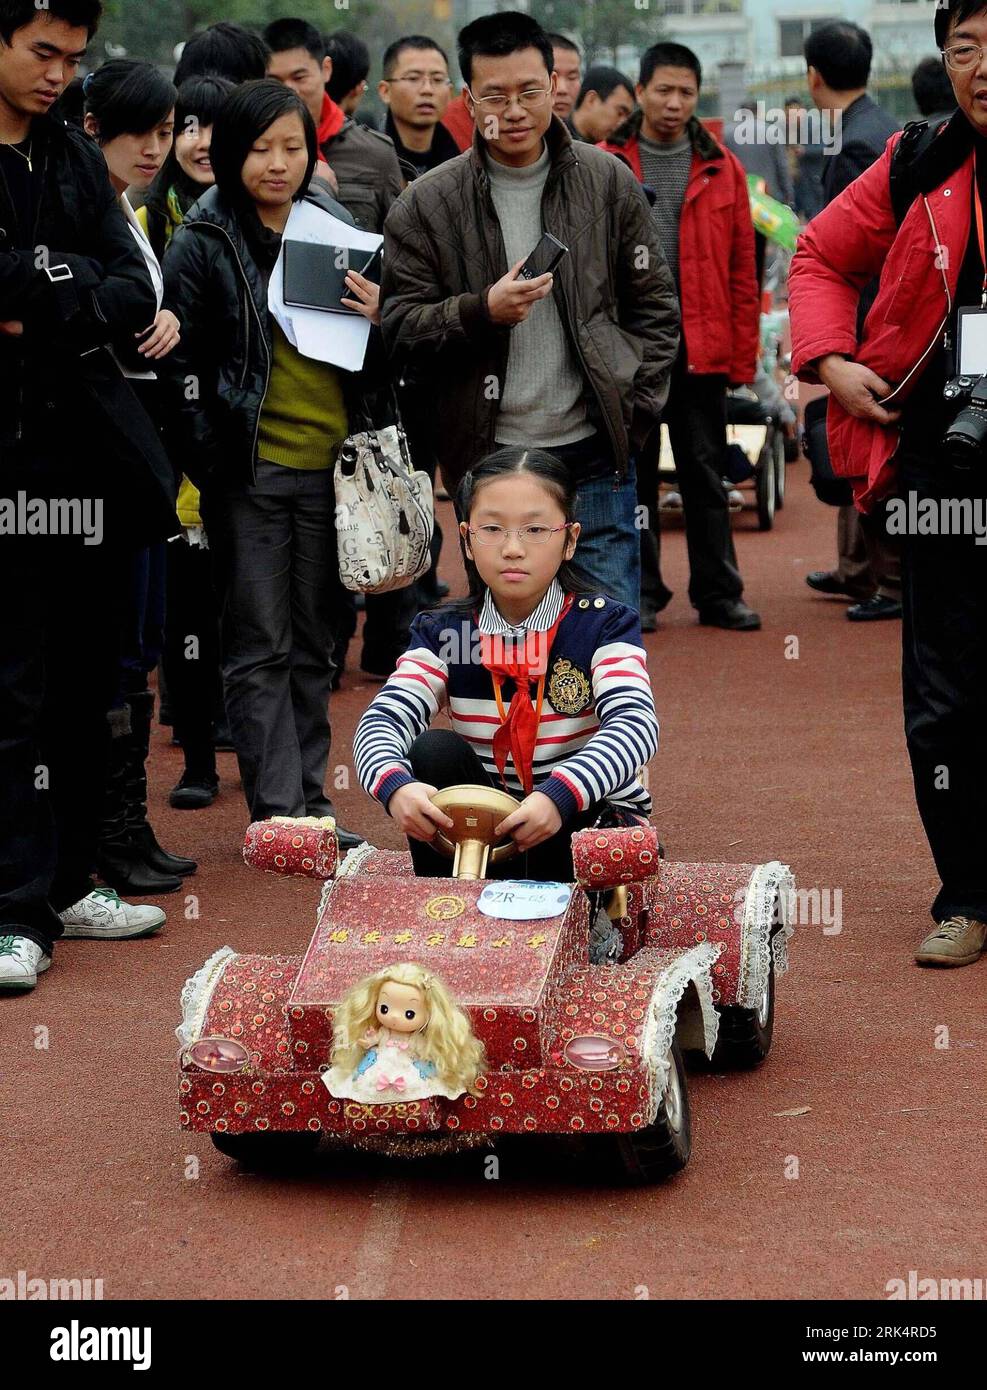 Bildnummer: 53661605  Datum: 11.12.2009  Copyright: imago/Xinhua (091212) -- HANGZHOU, Dec. 12, 2009 (Xinhua) -- Visitors watch a girl pupil driving a car model she designed and made at the final of the Hangzhou creative car models contest held in Hangzhou, east China s Zhejiang province, Dec. 11, 2009. The contest presented more than 30 creative car models made of refuse, whose designers and makers are pupils from schools in the province. (Xinhua/Zhu Yinwei) (wyx) (2)CHINA-ZHEJIANG-HANGZHOU-PUPIL-CREATIVE CAR MODELS (CN) PUBLICATIONxNOTxINxCHN Kinder Auto kurios Verpackung basteln Abfall Recy Stock Photo